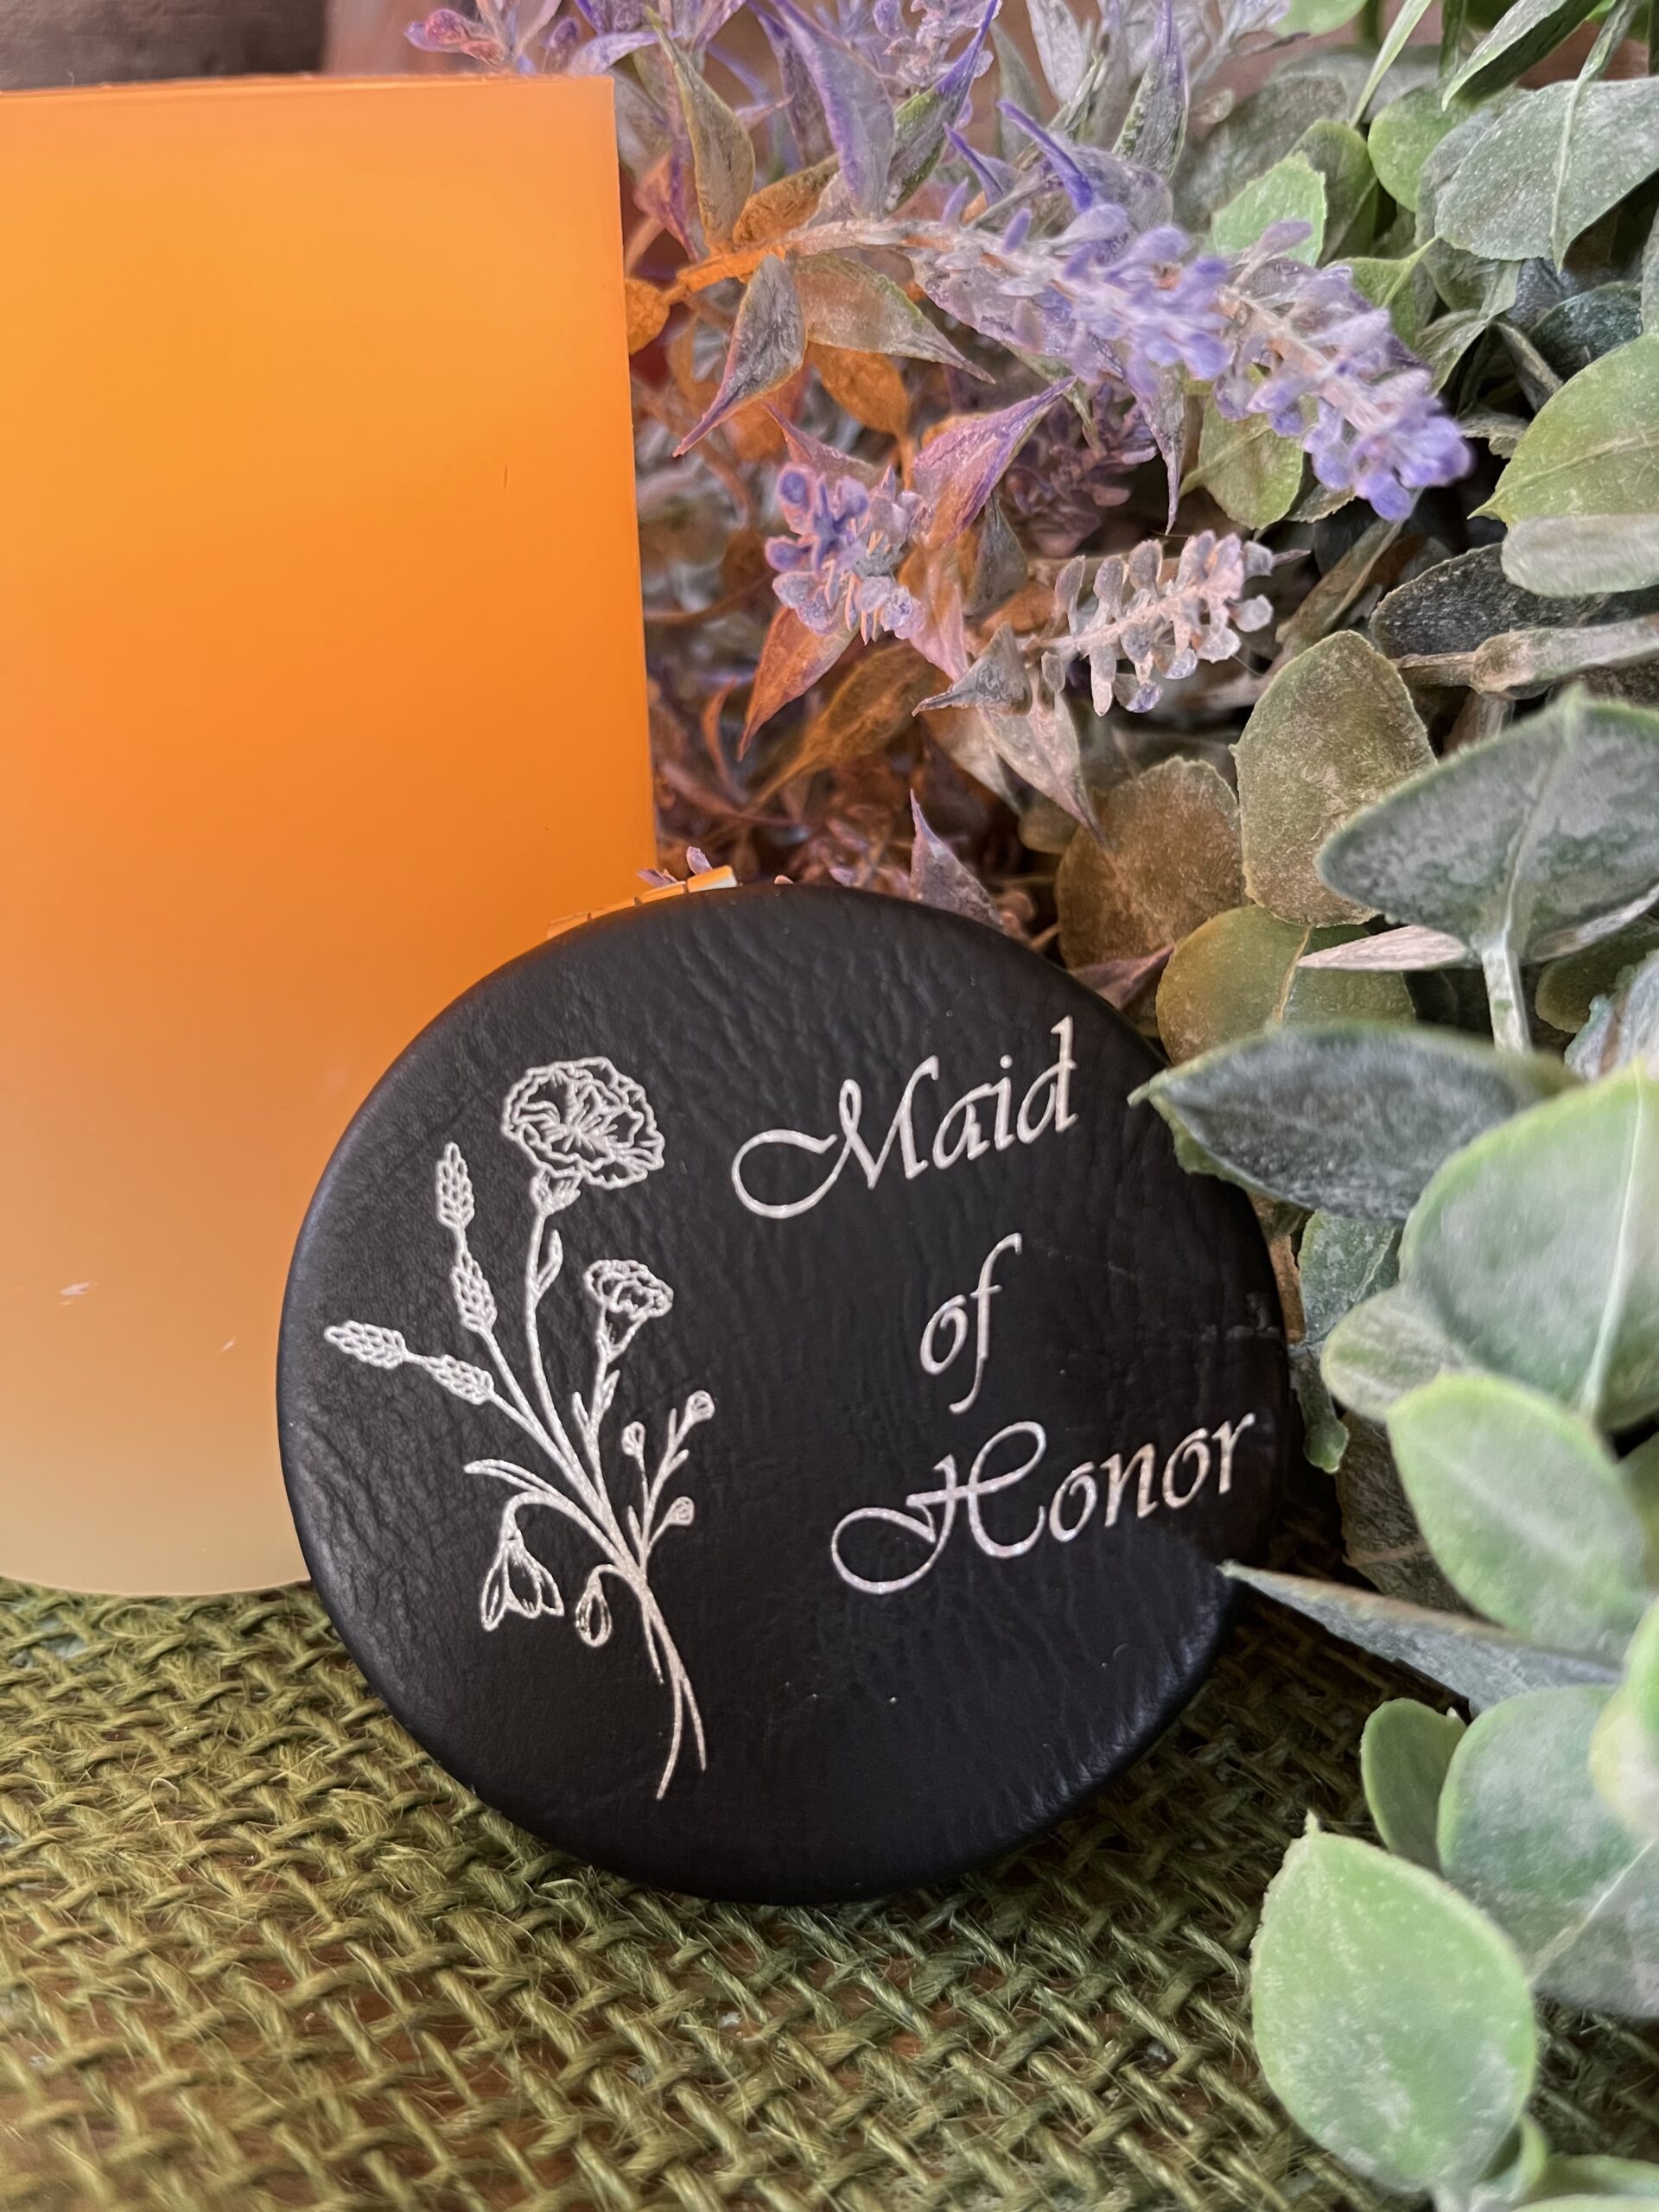 Engraved compact mirror